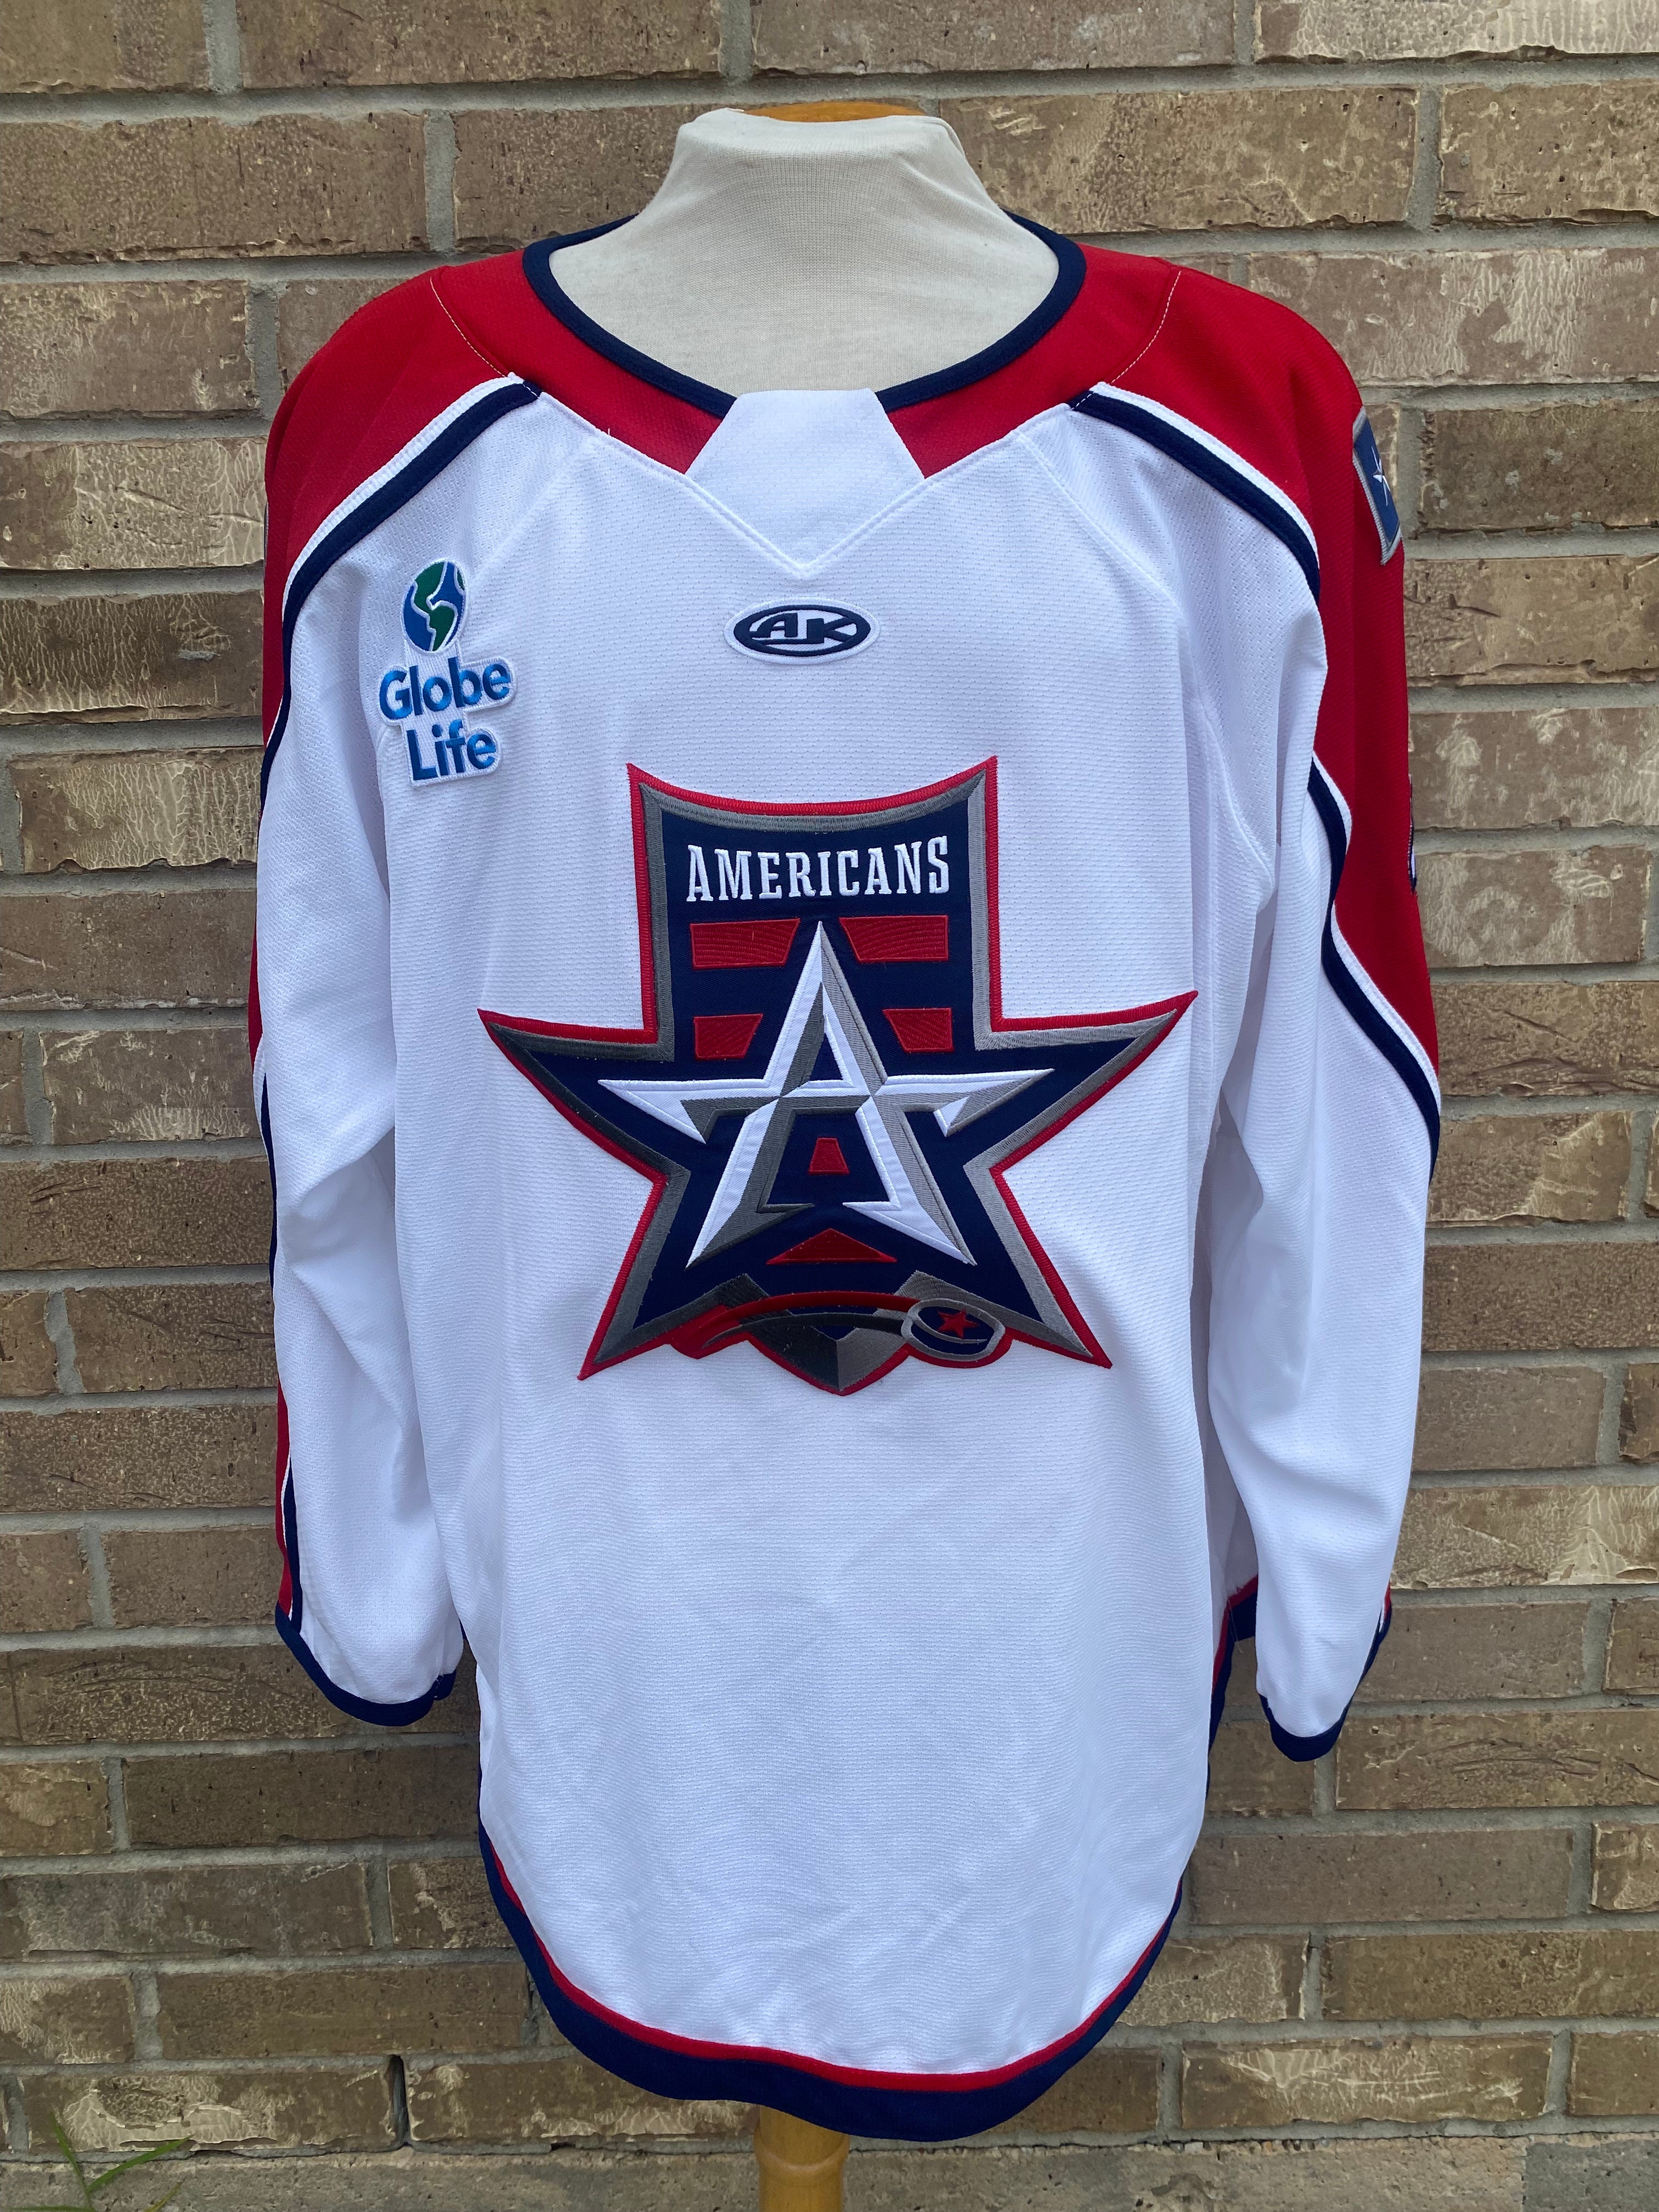 Allen Americans Youth White Jersey 2022-23 - Replica – Americans